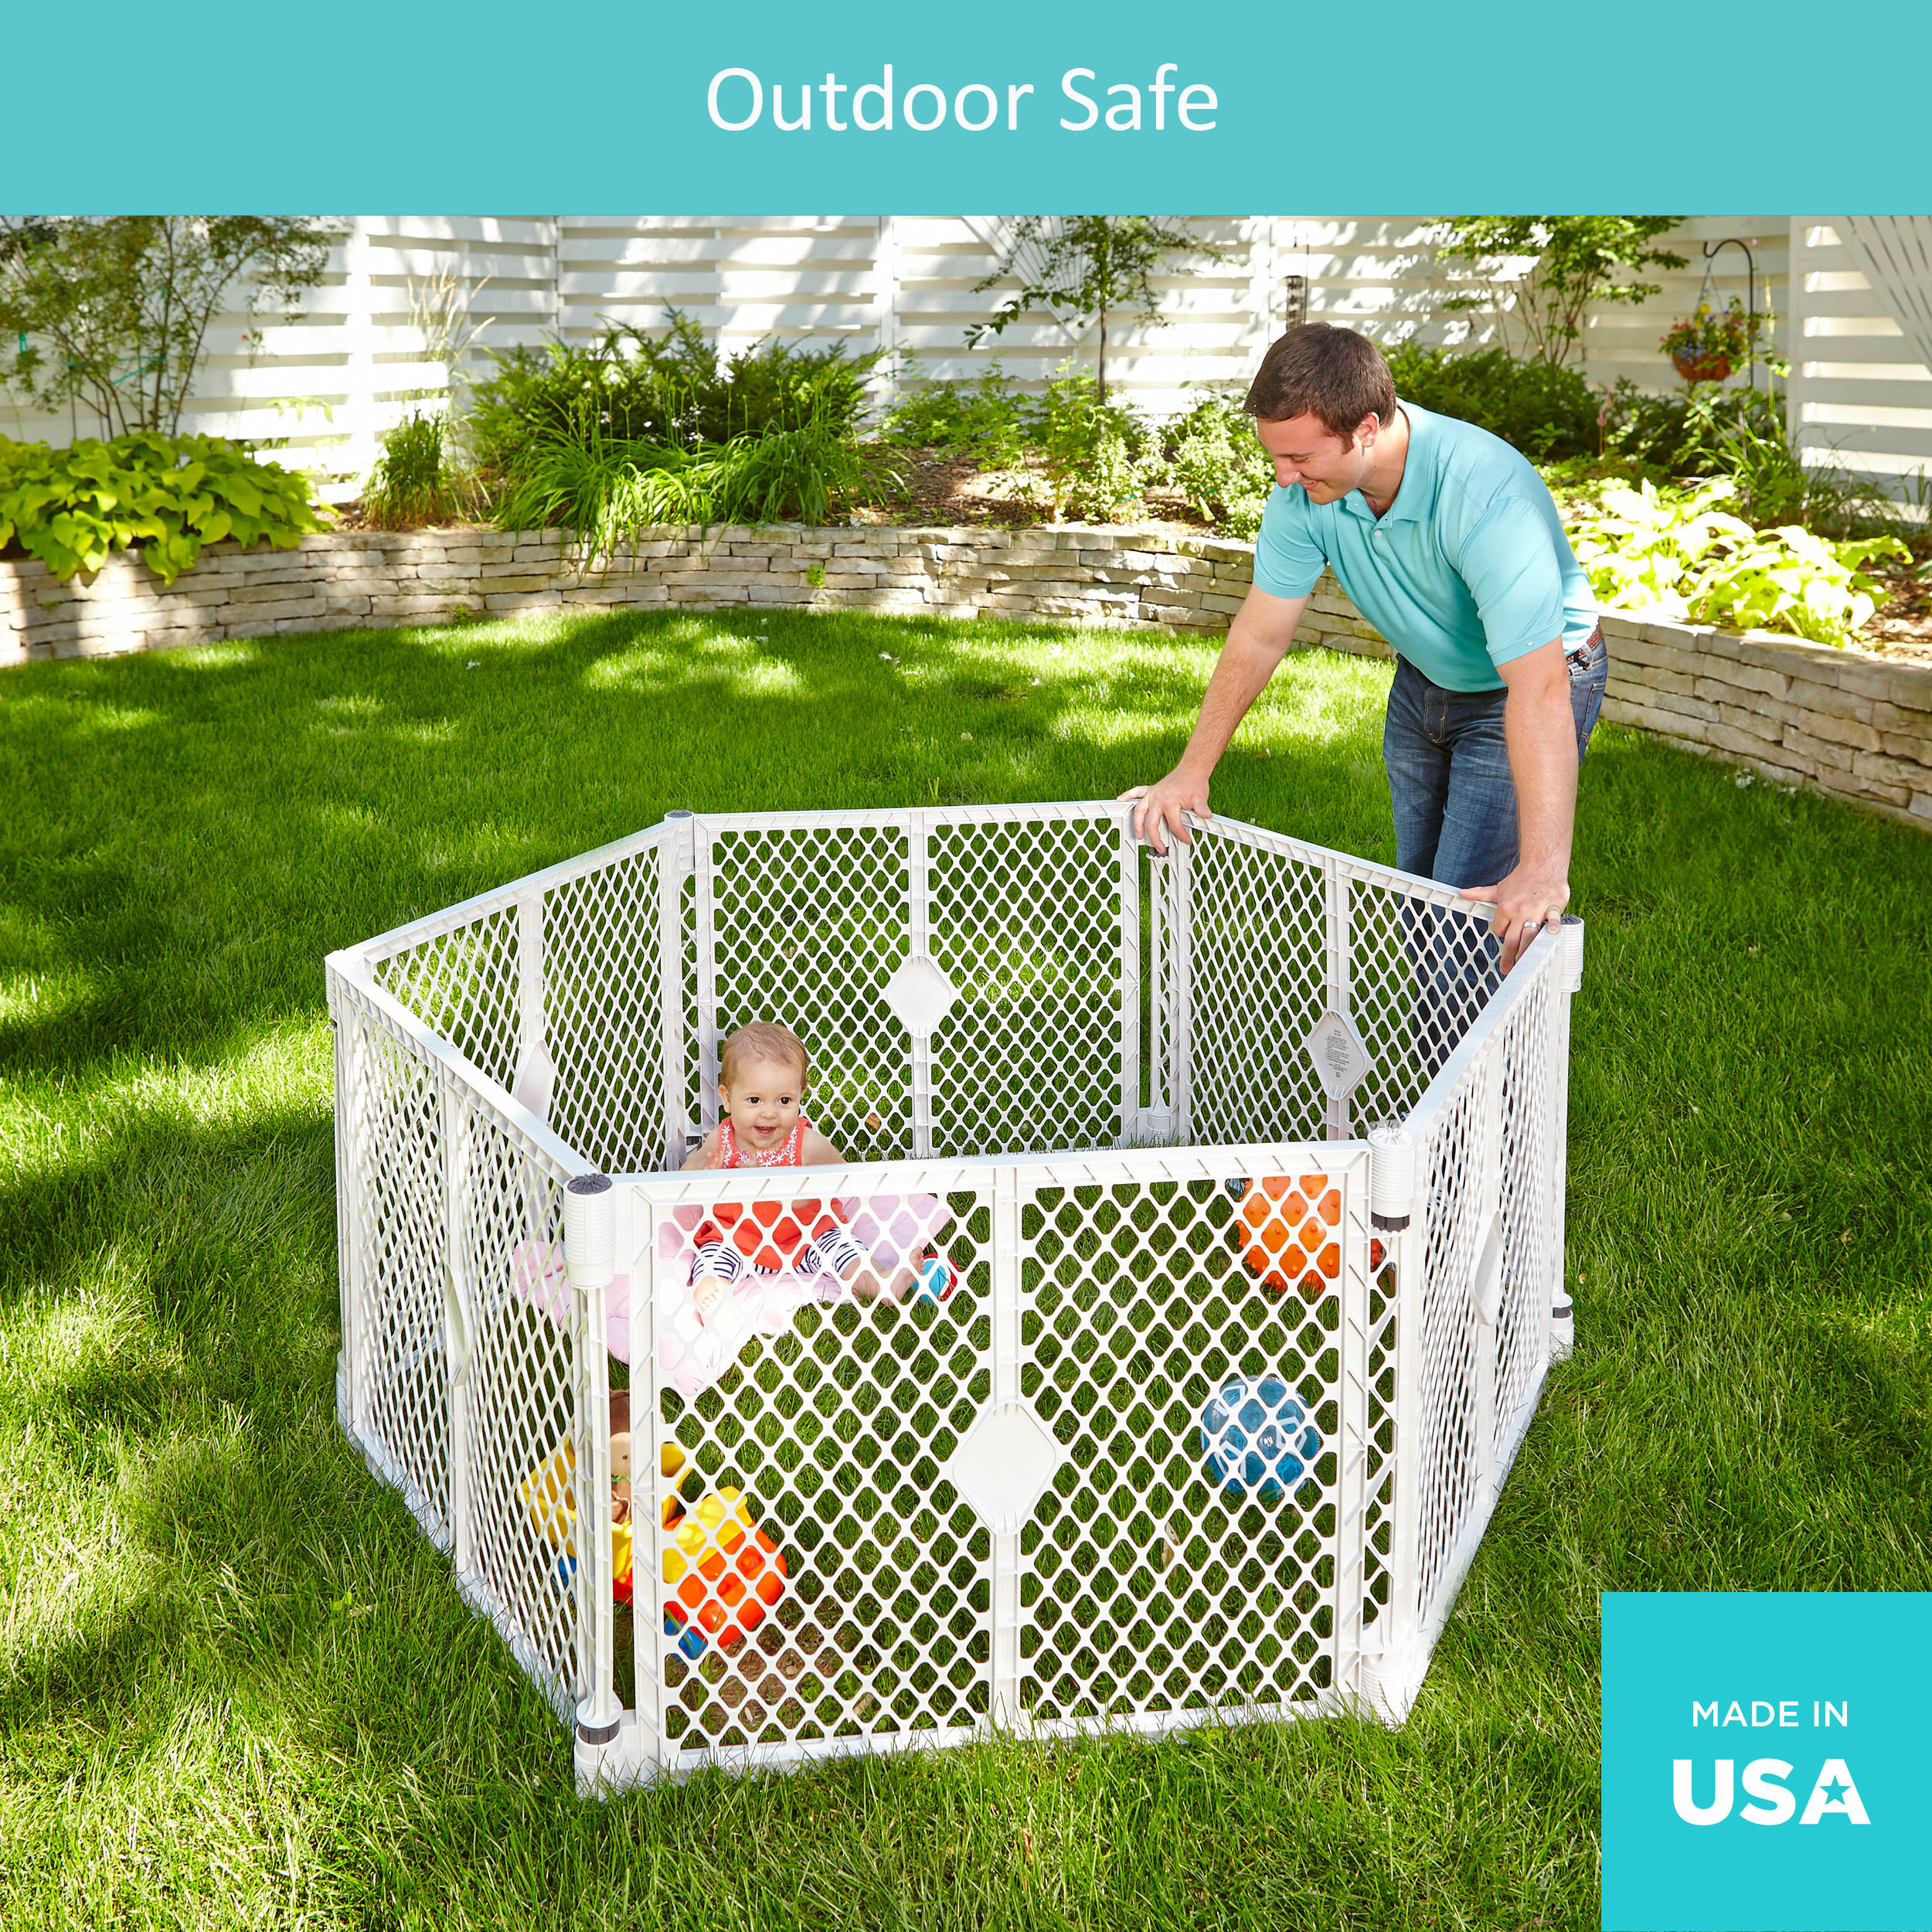 North States Superyard Gray 26 in. H X 18.5 in. W Plastic Child Safety Gate - image 5 of 9